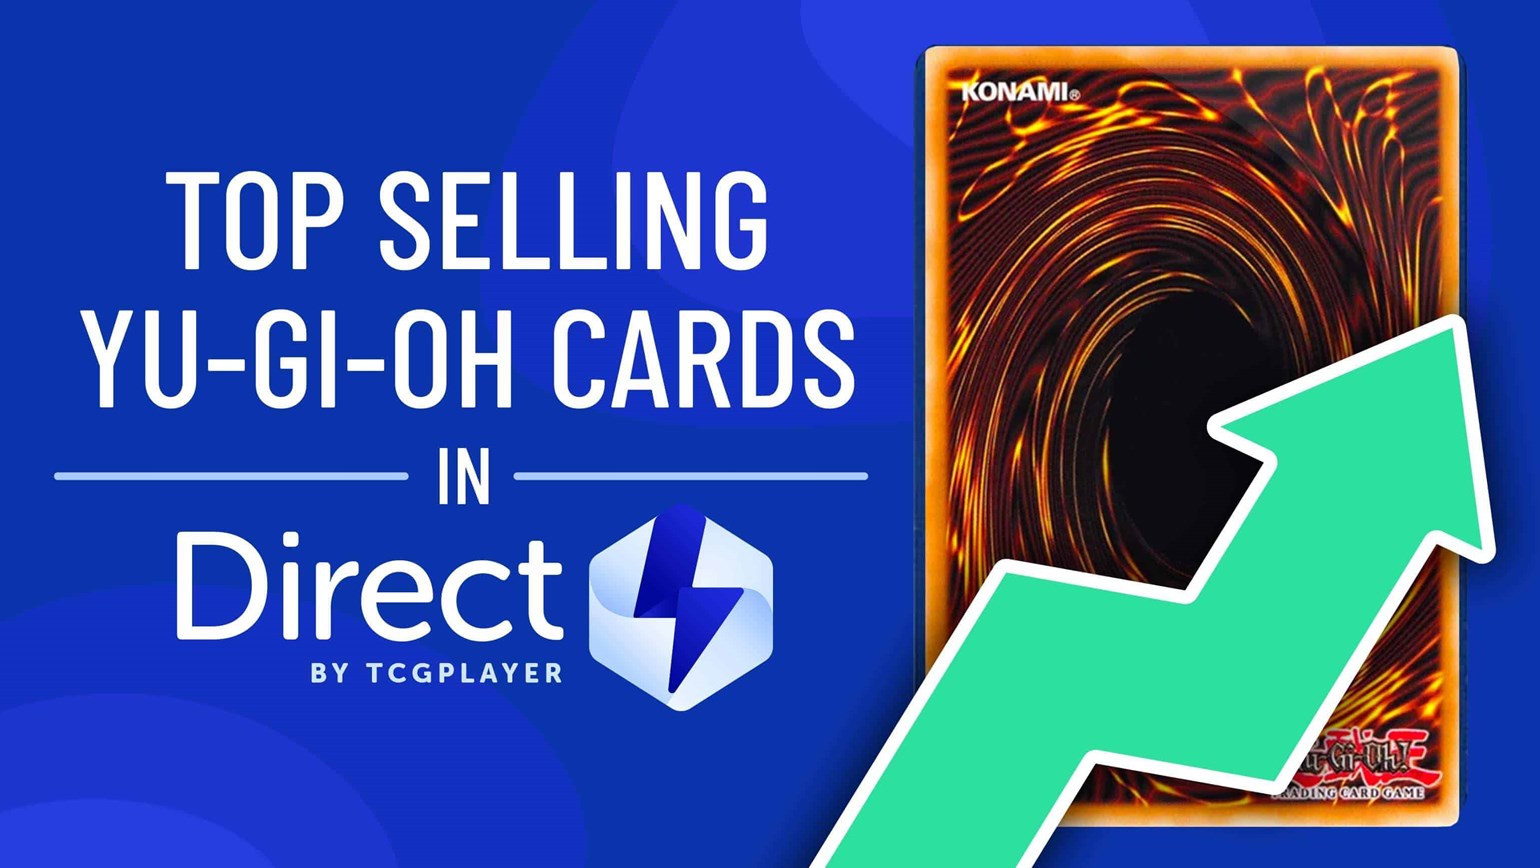 November Top Selling Yu-Gi-Oh! Cards in Direct by TCGplayer